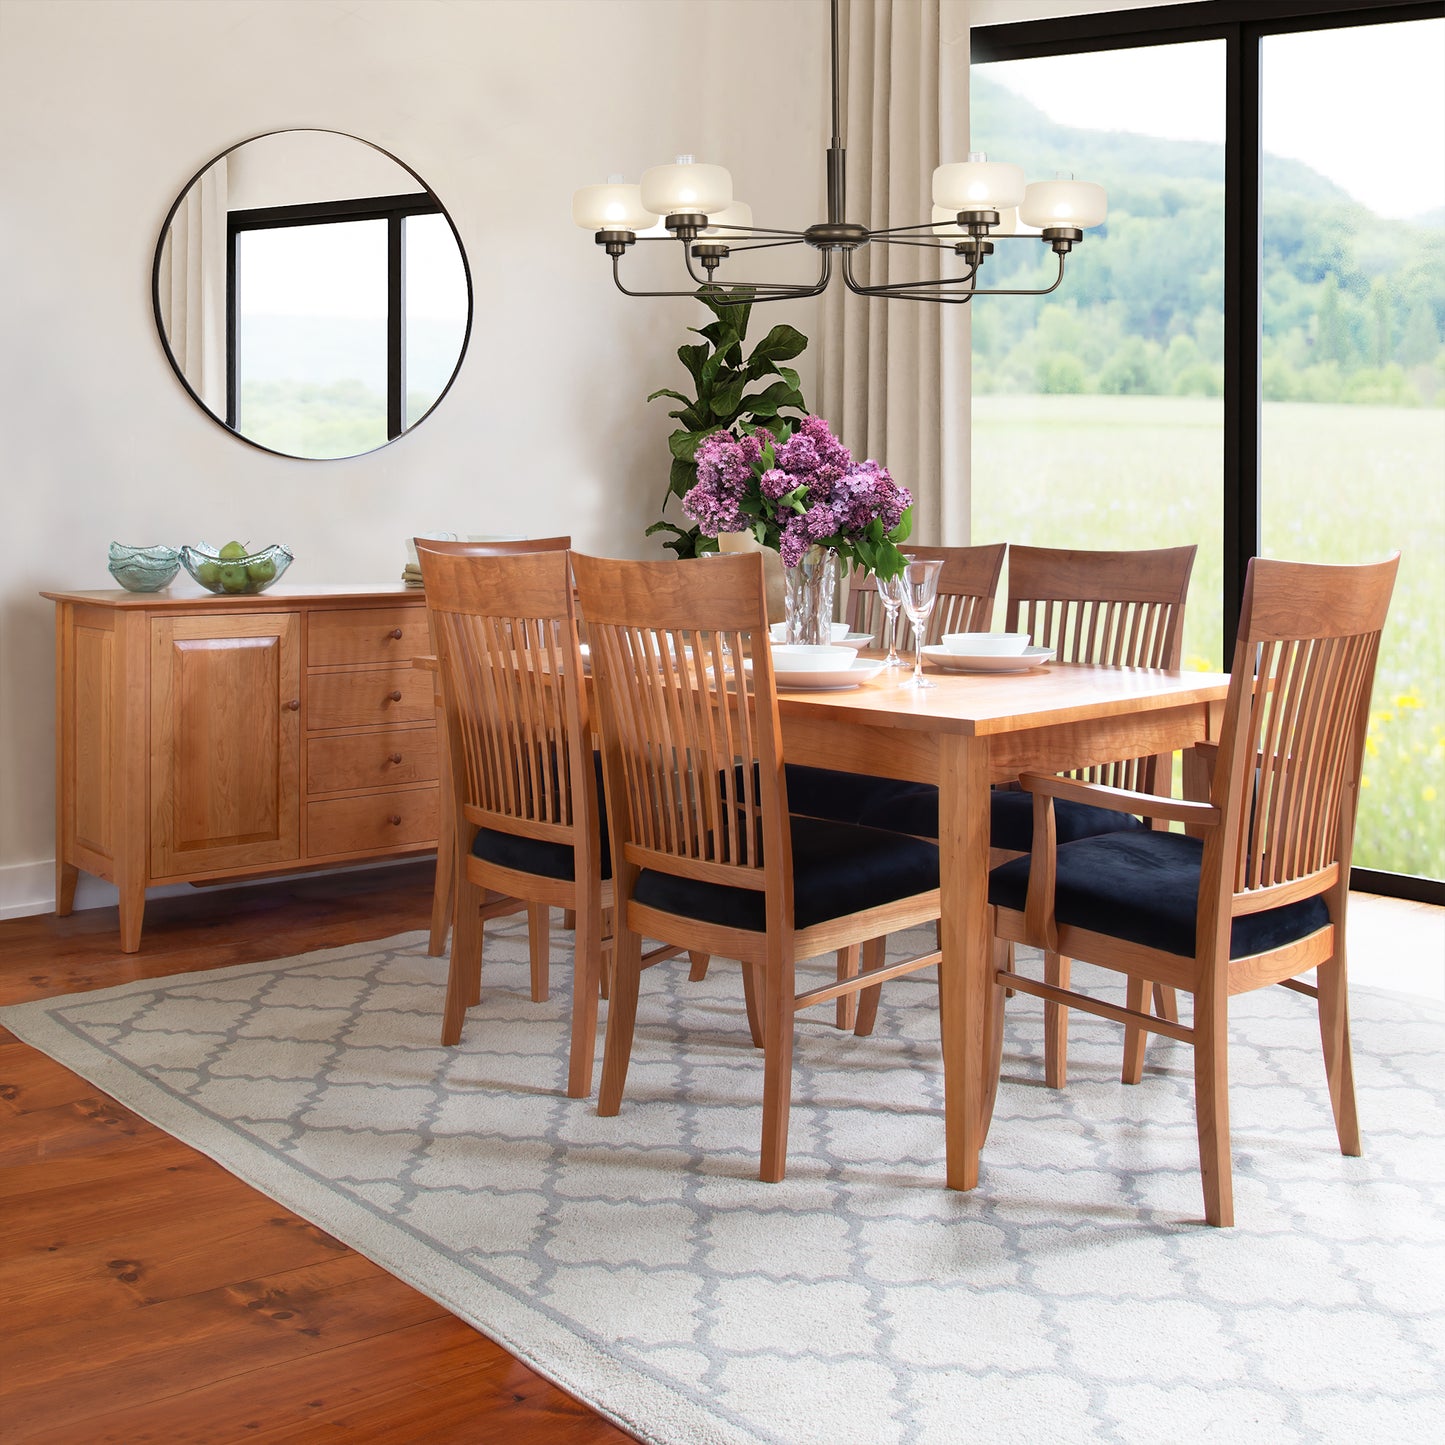 A well-lit dining room featuring a wooden table with six Vermont Woods Studios Contemporary Shaker chairs, a sideboard, and a circular mirror. Large windows show a scenic outdoor view. Decor includes a chandelier and